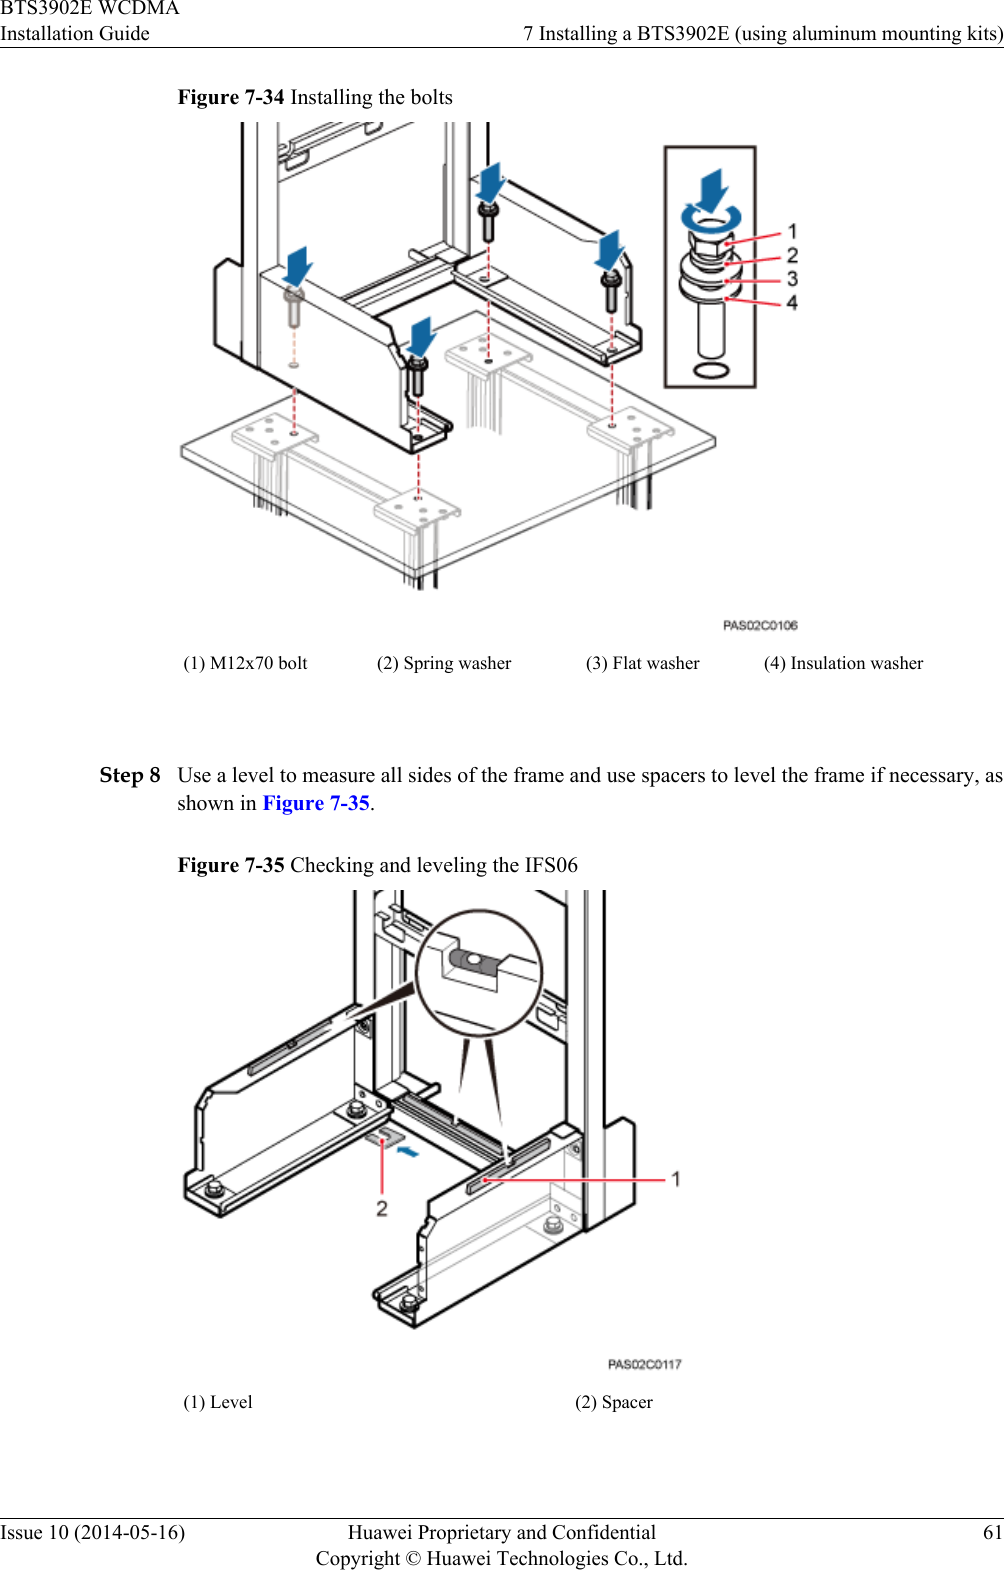 Figure 7-34 Installing the bolts(1) M12x70 bolt (2) Spring washer (3) Flat washer (4) Insulation washer Step 8 Use a level to measure all sides of the frame and use spacers to level the frame if necessary, asshown in Figure 7-35.Figure 7-35 Checking and leveling the IFS06(1) Level (2) Spacer BTS3902E WCDMAInstallation Guide 7 Installing a BTS3902E (using aluminum mounting kits)Issue 10 (2014-05-16) Huawei Proprietary and ConfidentialCopyright © Huawei Technologies Co., Ltd.61